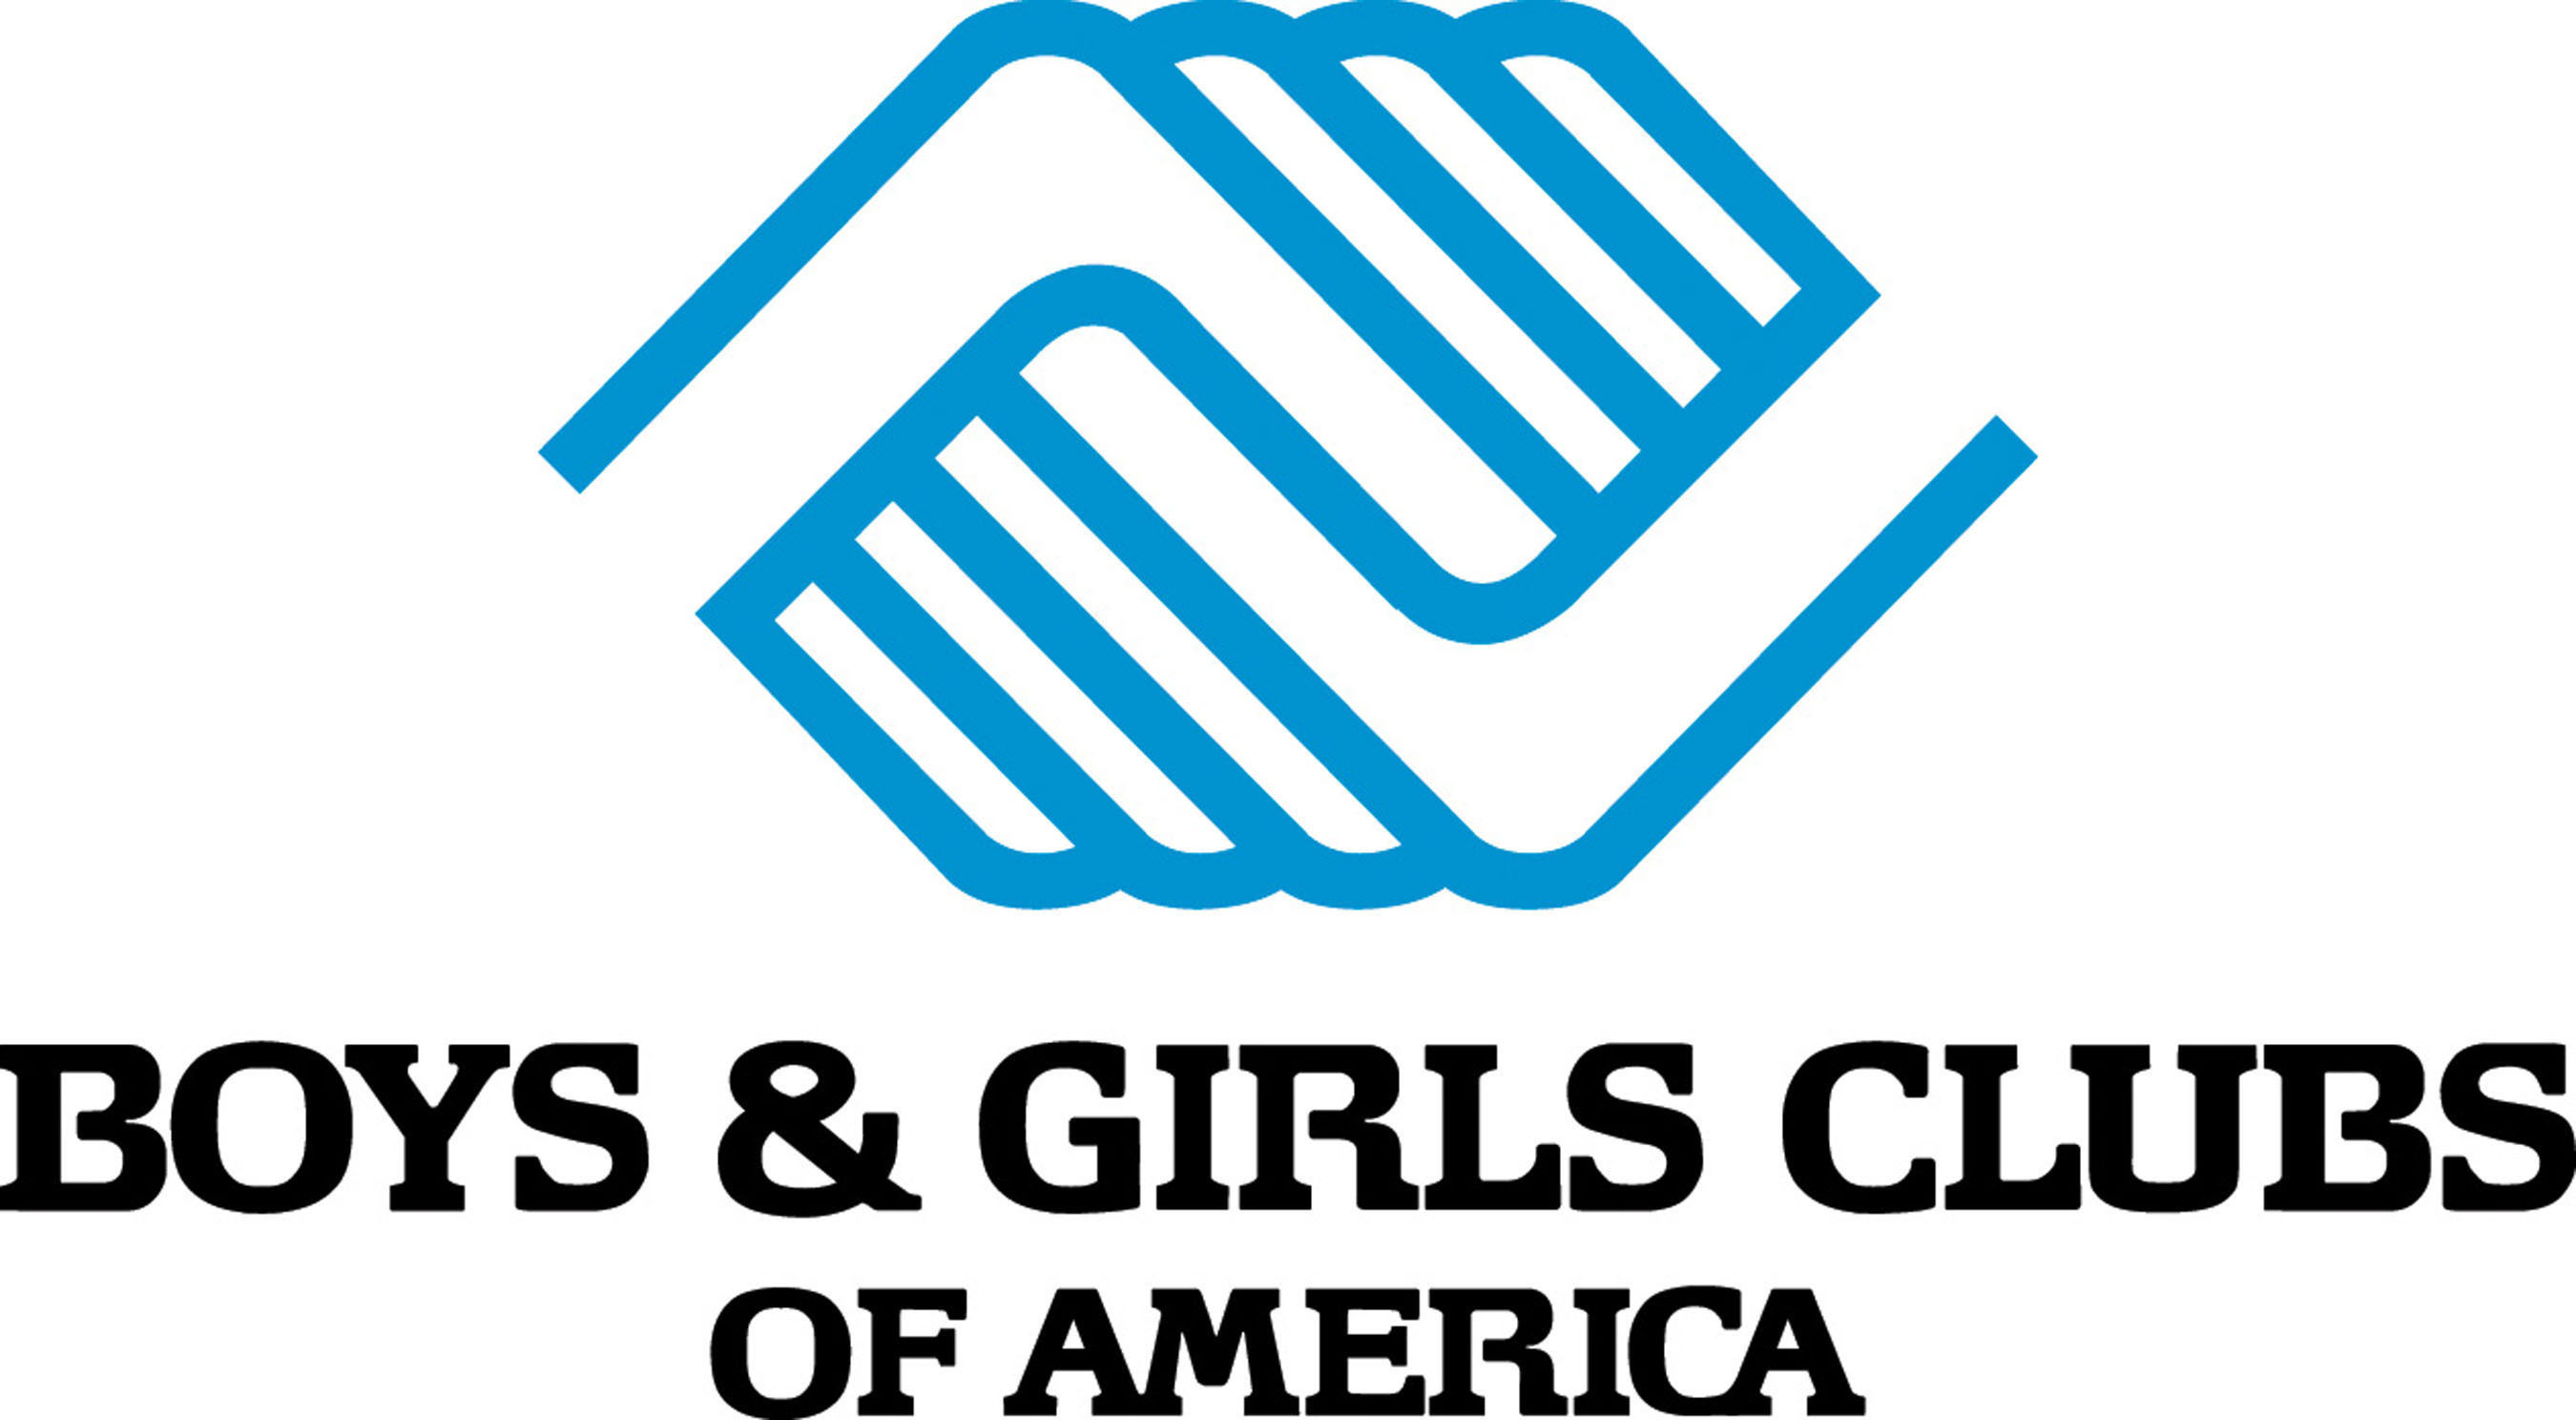 Nick to Assist Boys & Girls Club with ‘Great Futures’ Campaign Launch